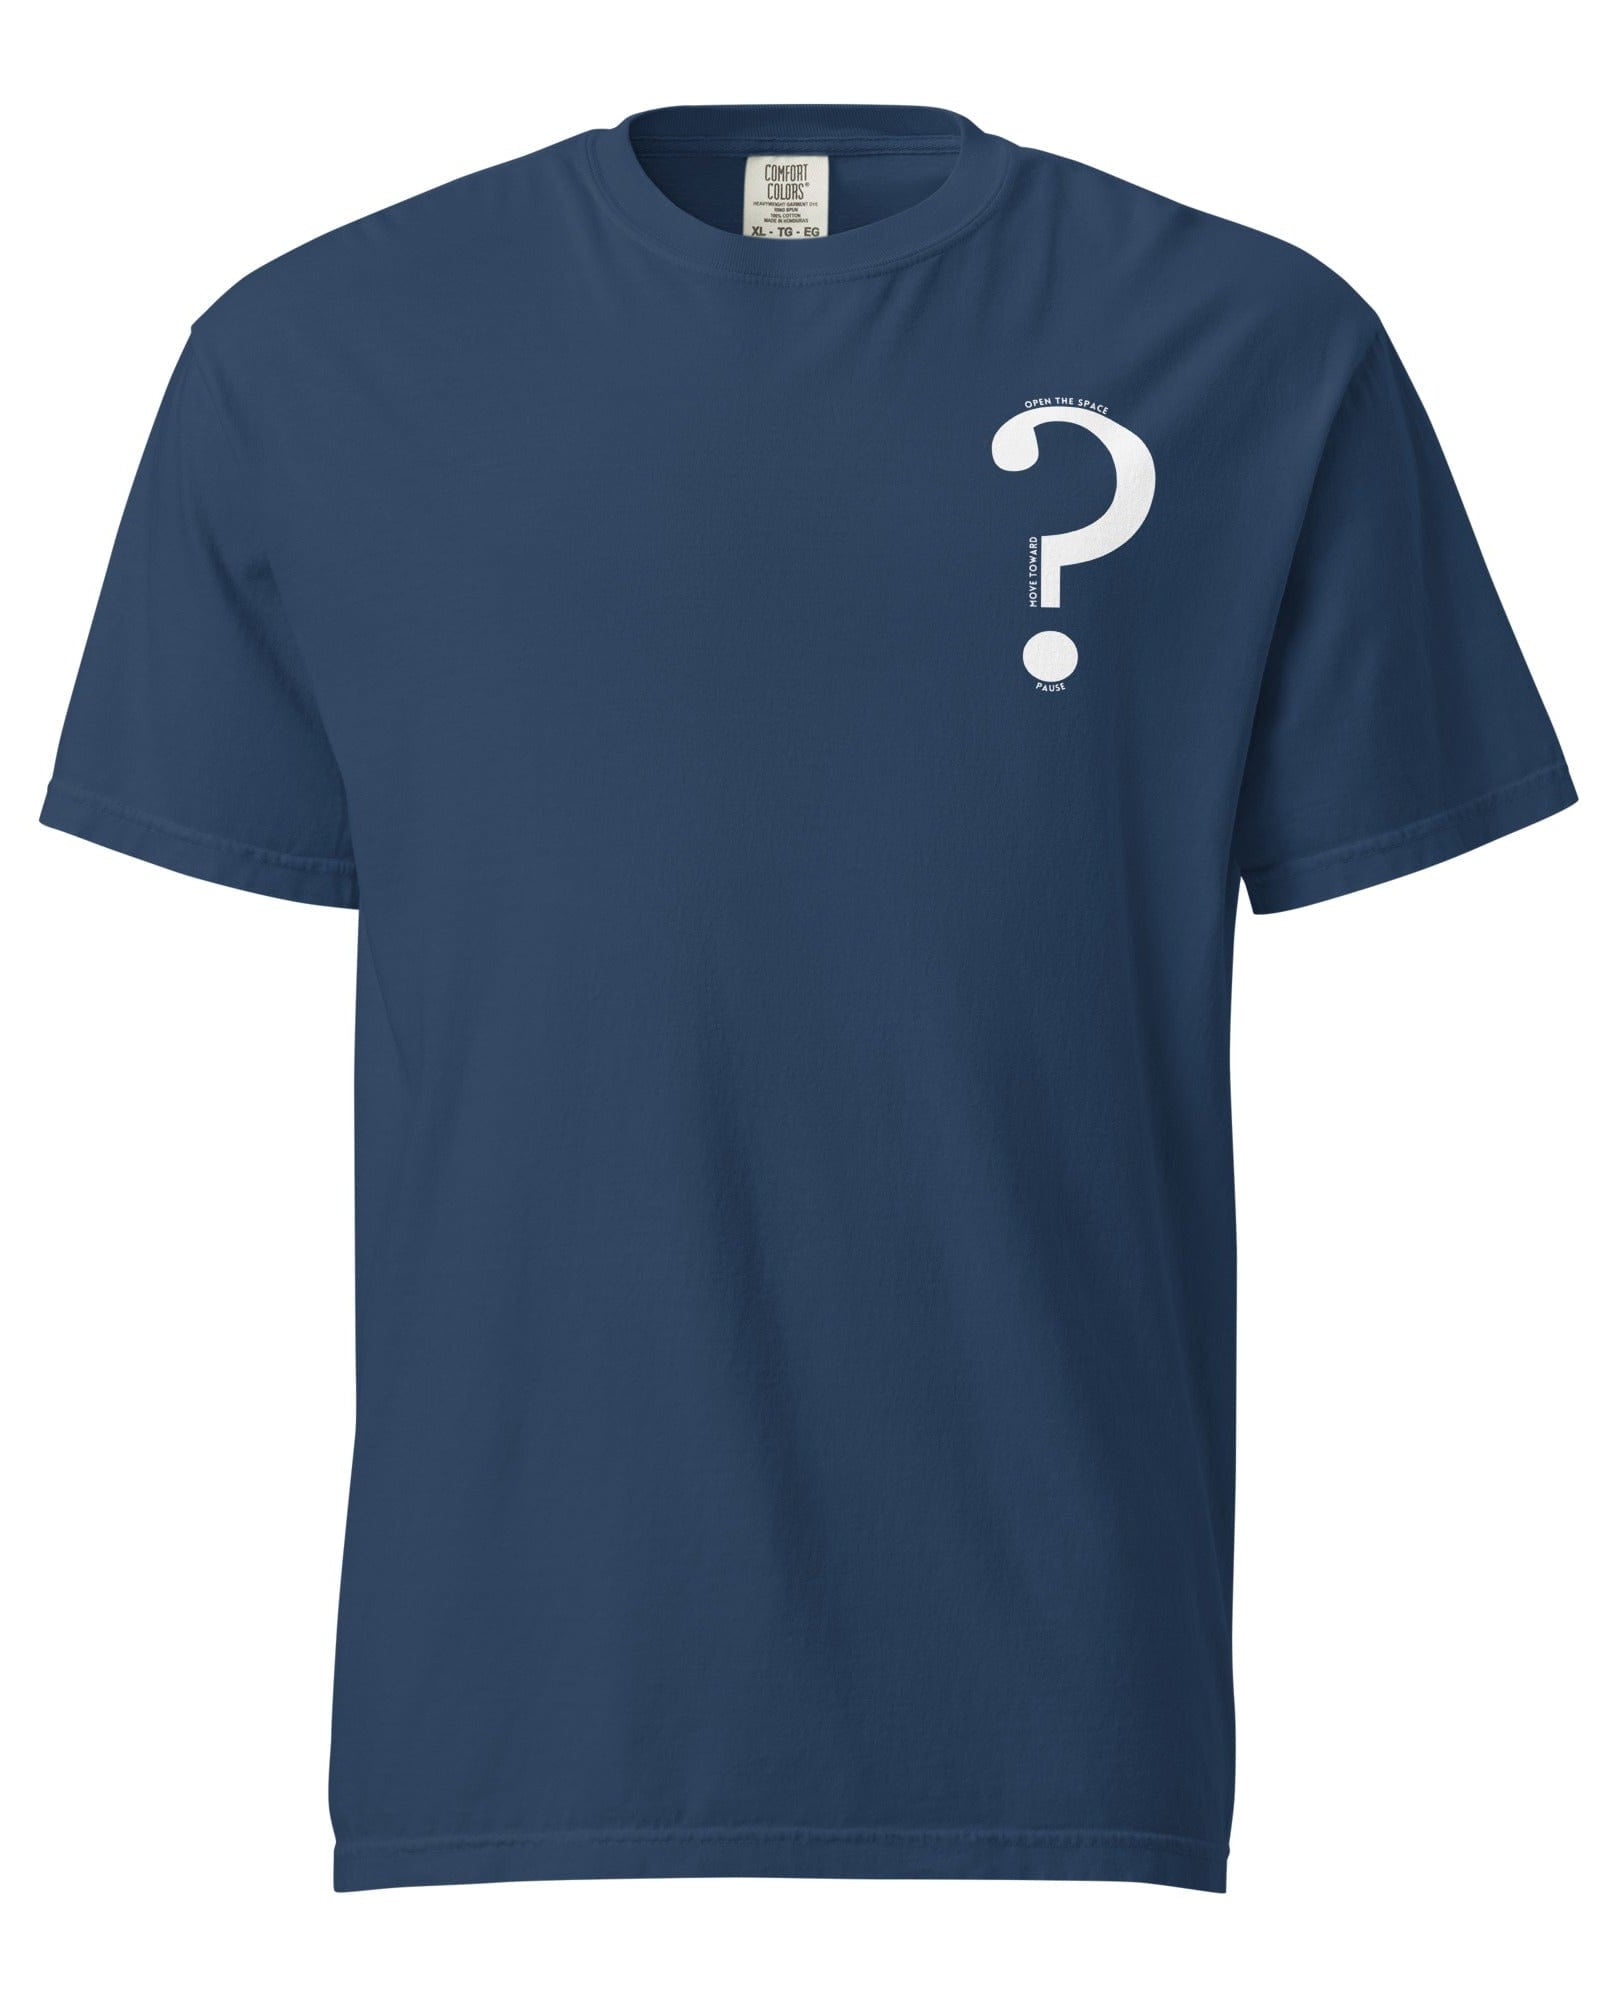 Question Mark: Pause, Move Toward, Open the Space | T-shirt True Navy / S Shirts & Tops Jolly & Goode